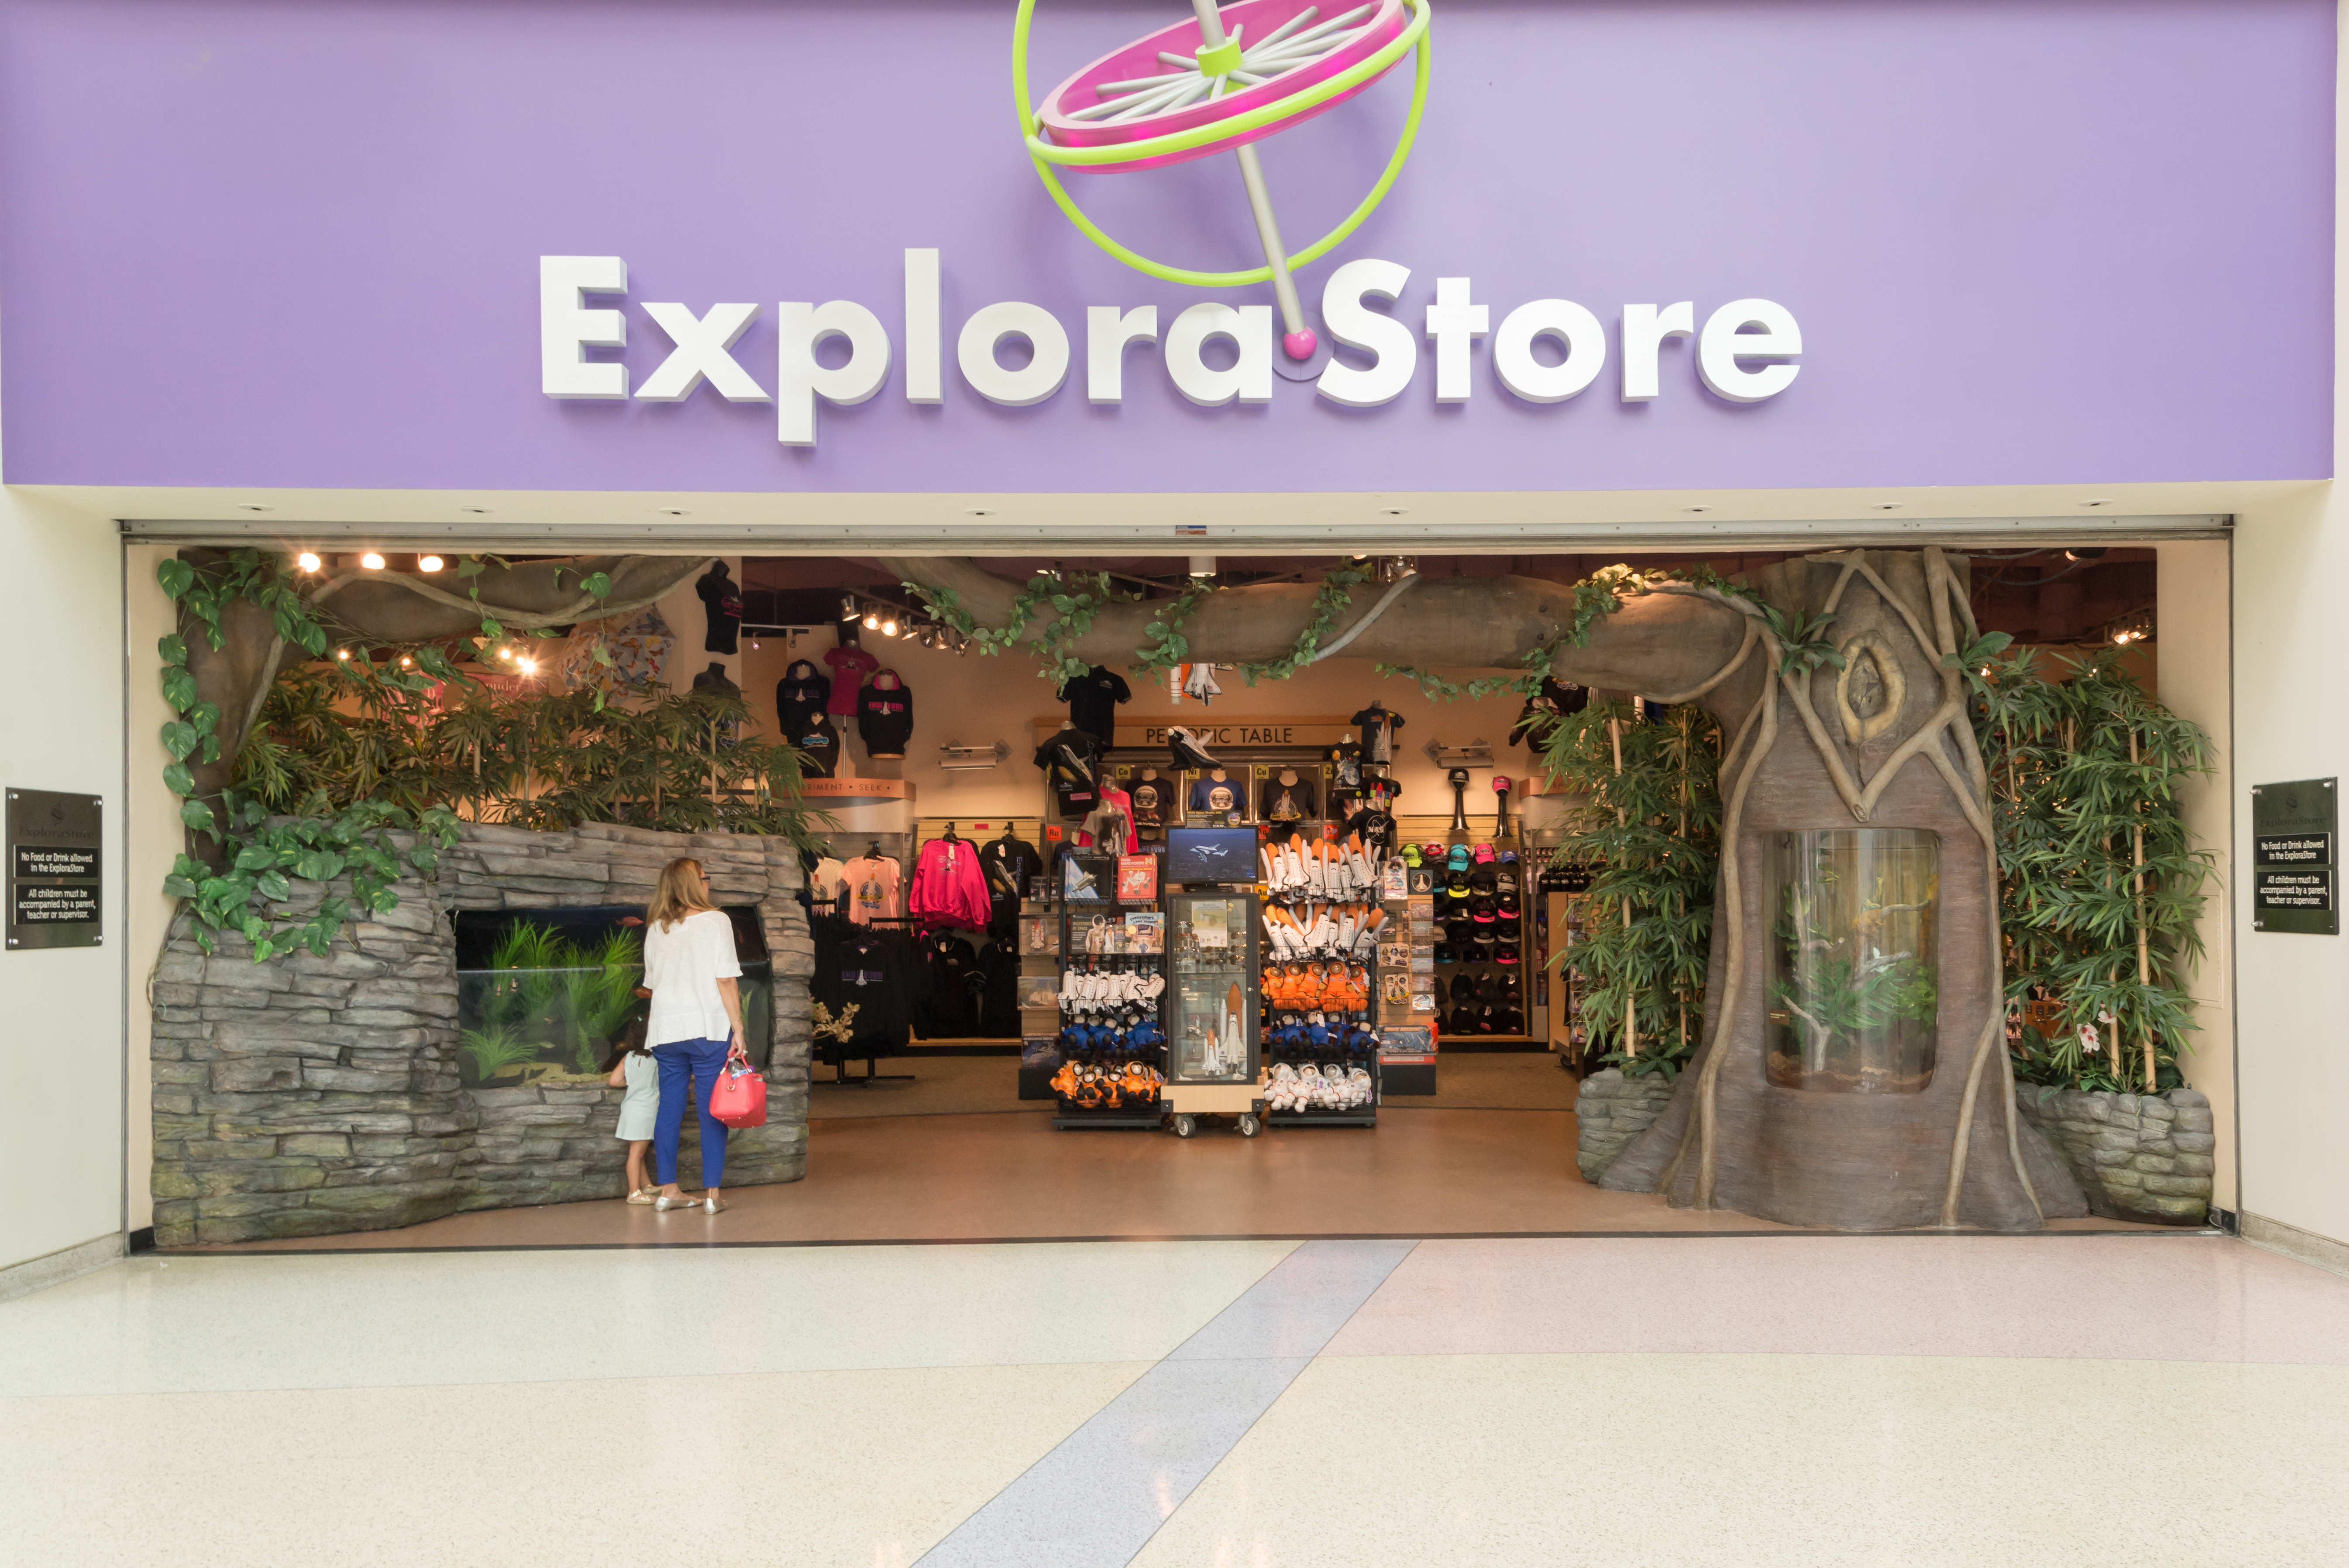 Woman and child stand outside ExploraStore entrance. Upper entry signage reads "Explorastore" and features a large decorative gyroscope. Racks of store merchandise can be seen inside.